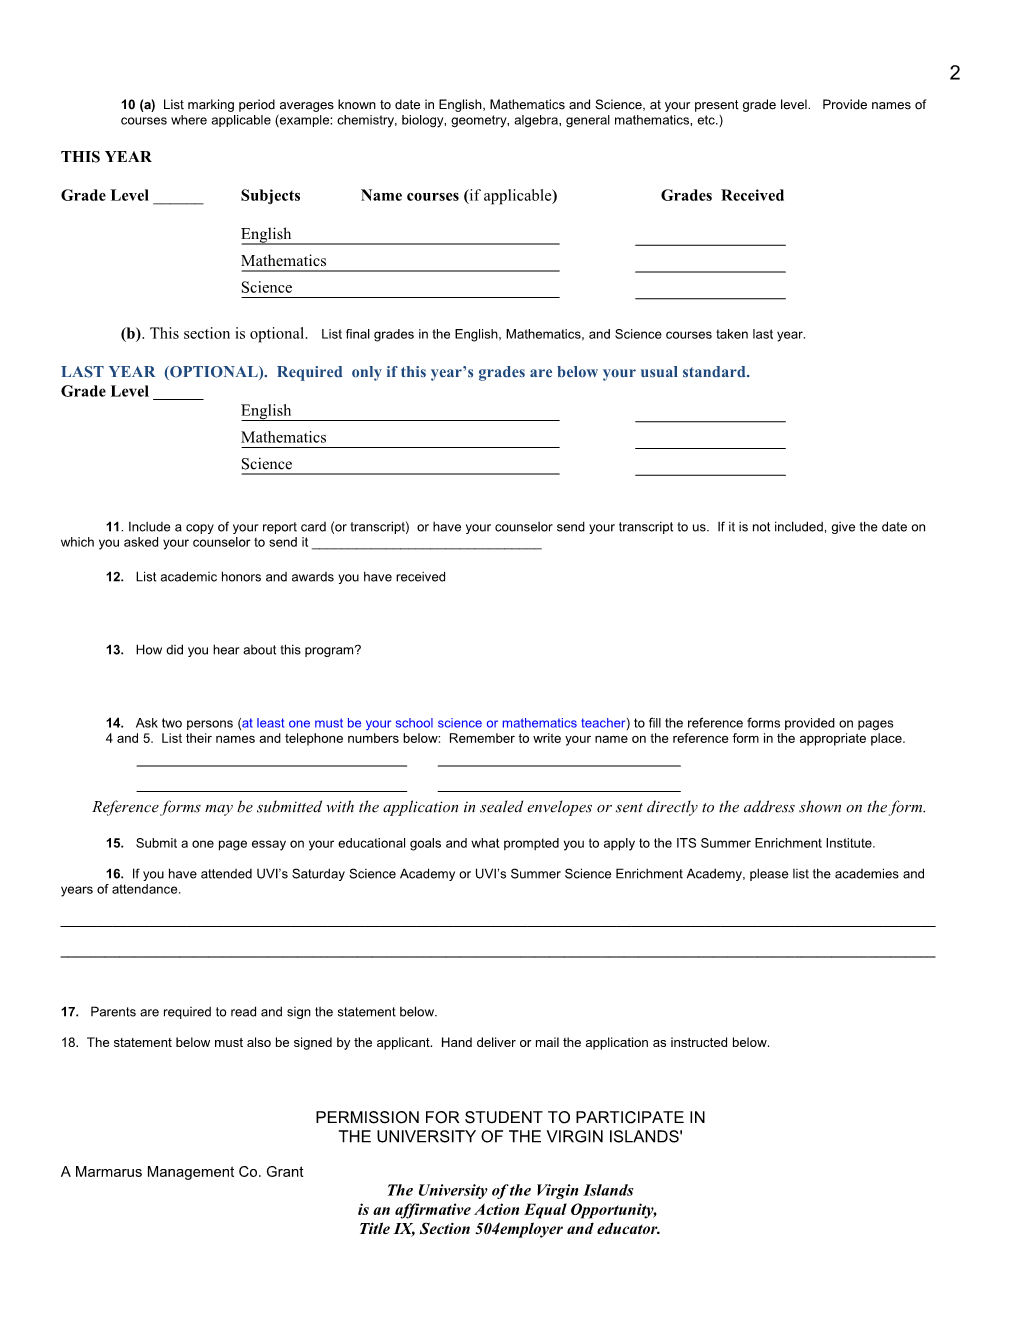 ITS SUMMER 2009 ENRICHMENT INSTITUTE Application in MS Word Format